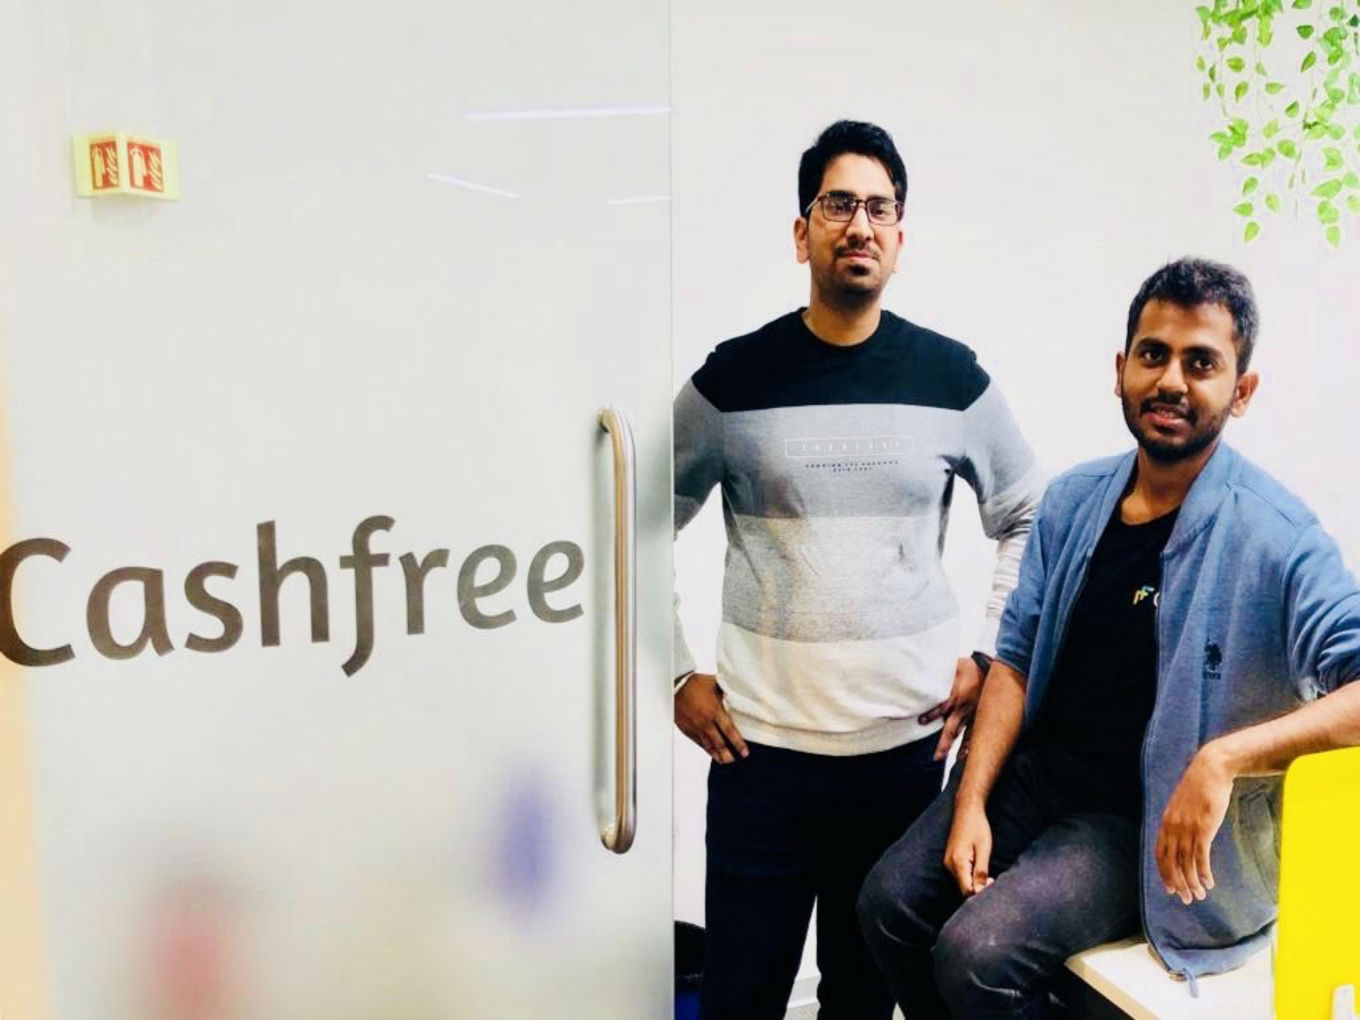 How Cashfree Is Looking To Change Ecommerce With Its Instant Refunds Option-Payment Gateway Startup Cashfree Raises $5.5 Mn In Series A Round